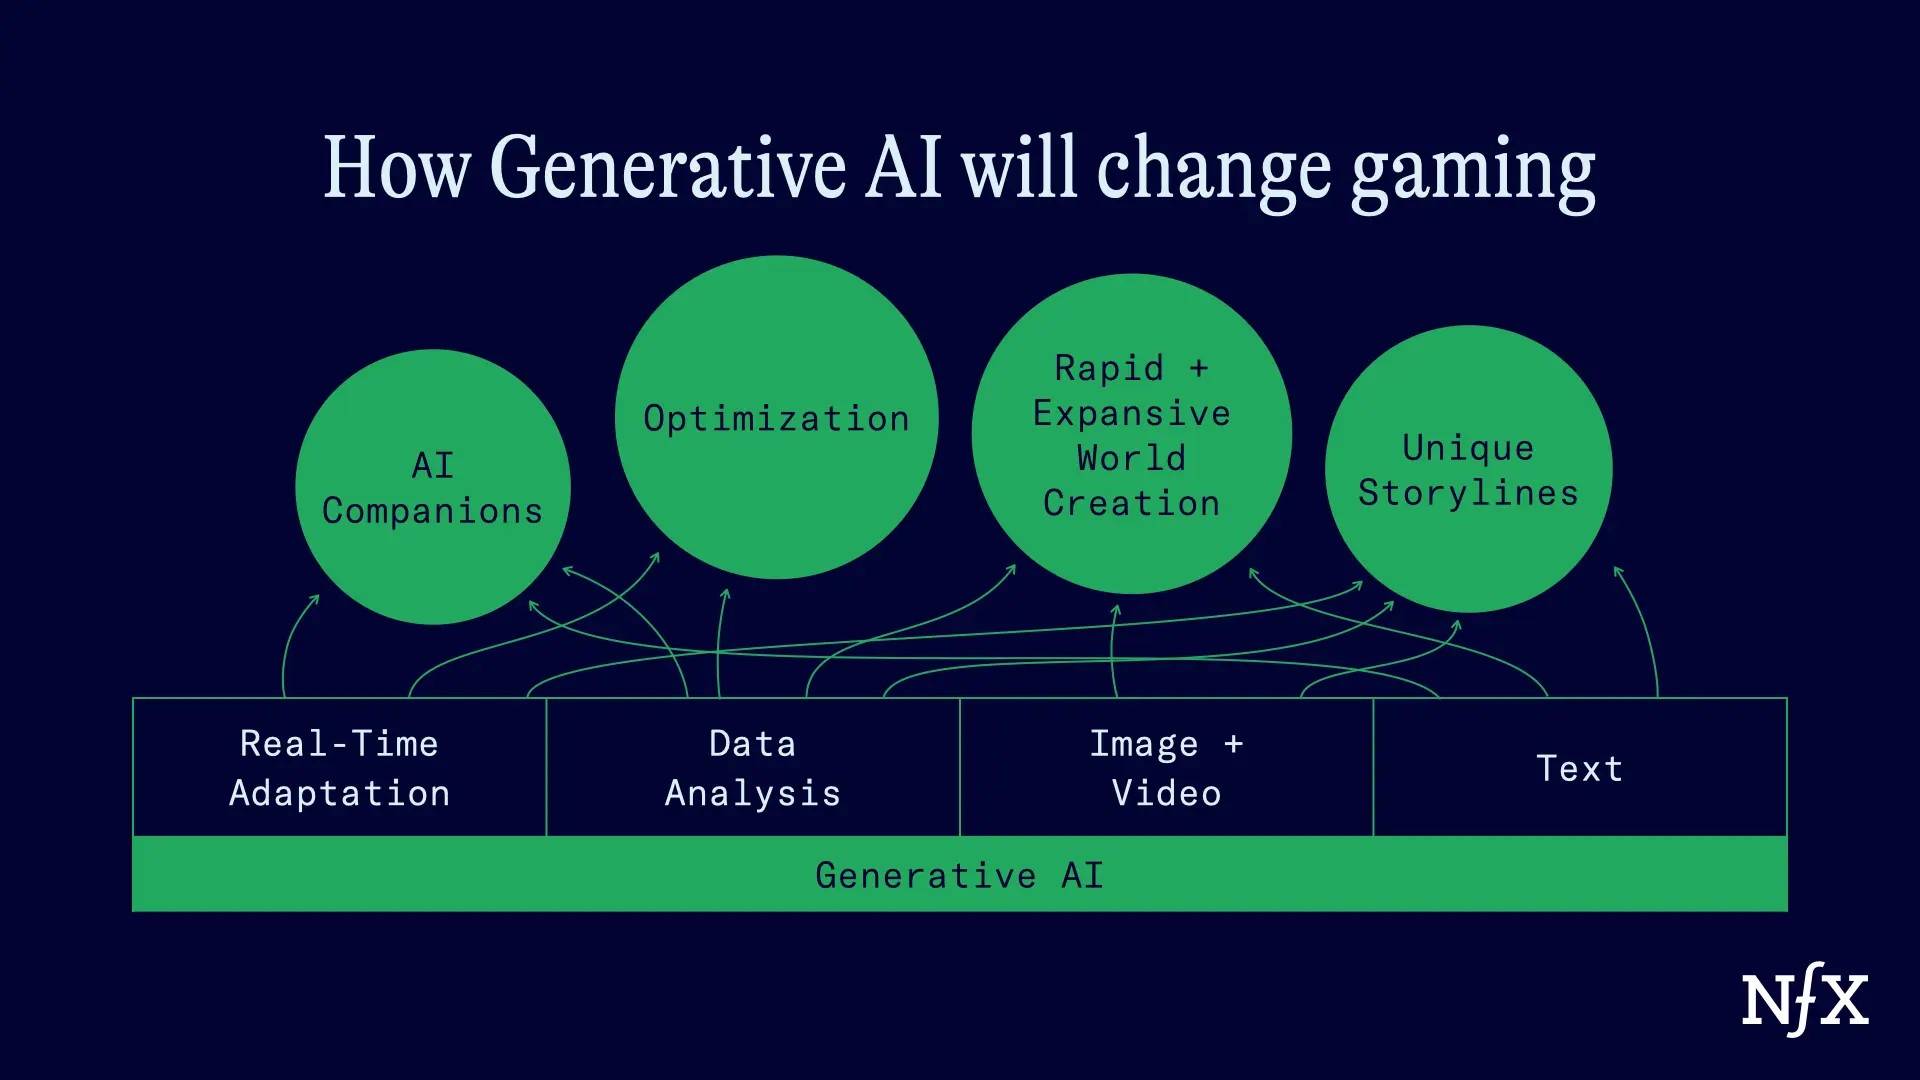 How generative AI will change gaming